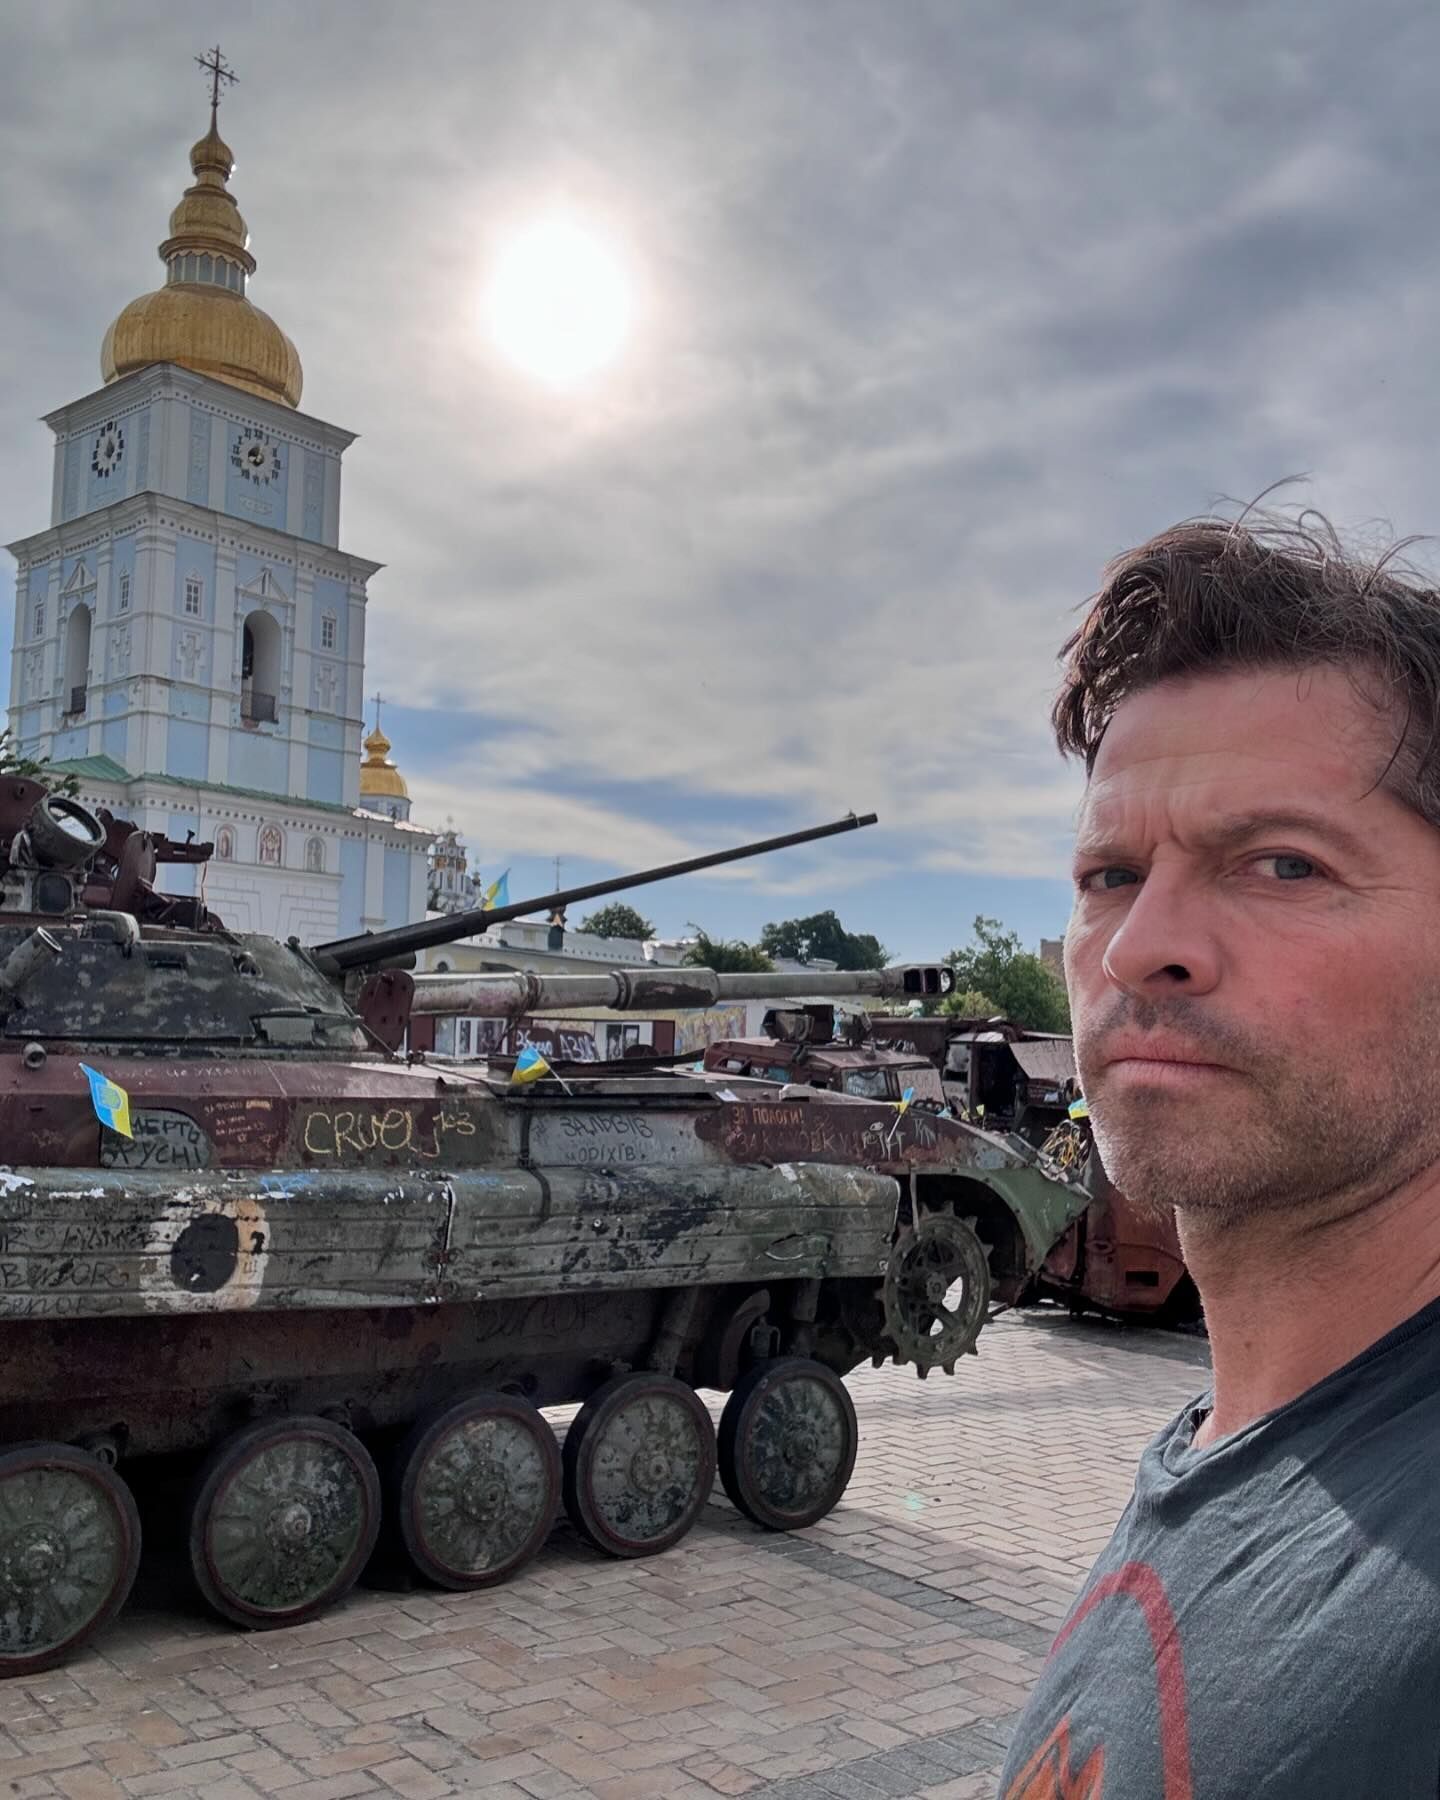 Supernatural star Misha Collins arrived in Kyiv and showed a photo in front of destroyed Russian equipment.